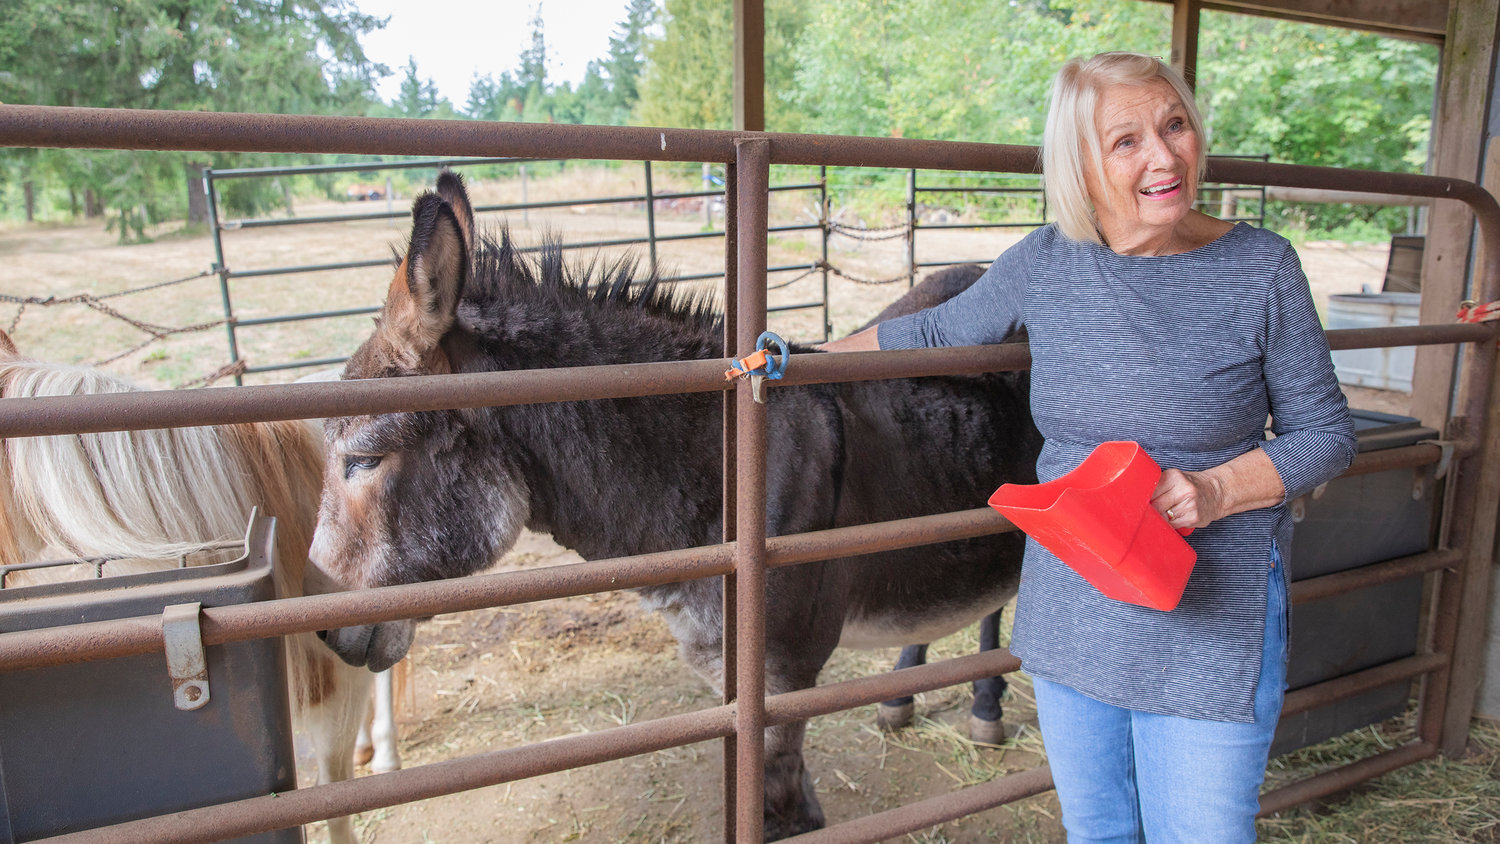 Lynda Lennox talks about Bart the donkey at her property off Scheuber Road in Centralia earlier this week.